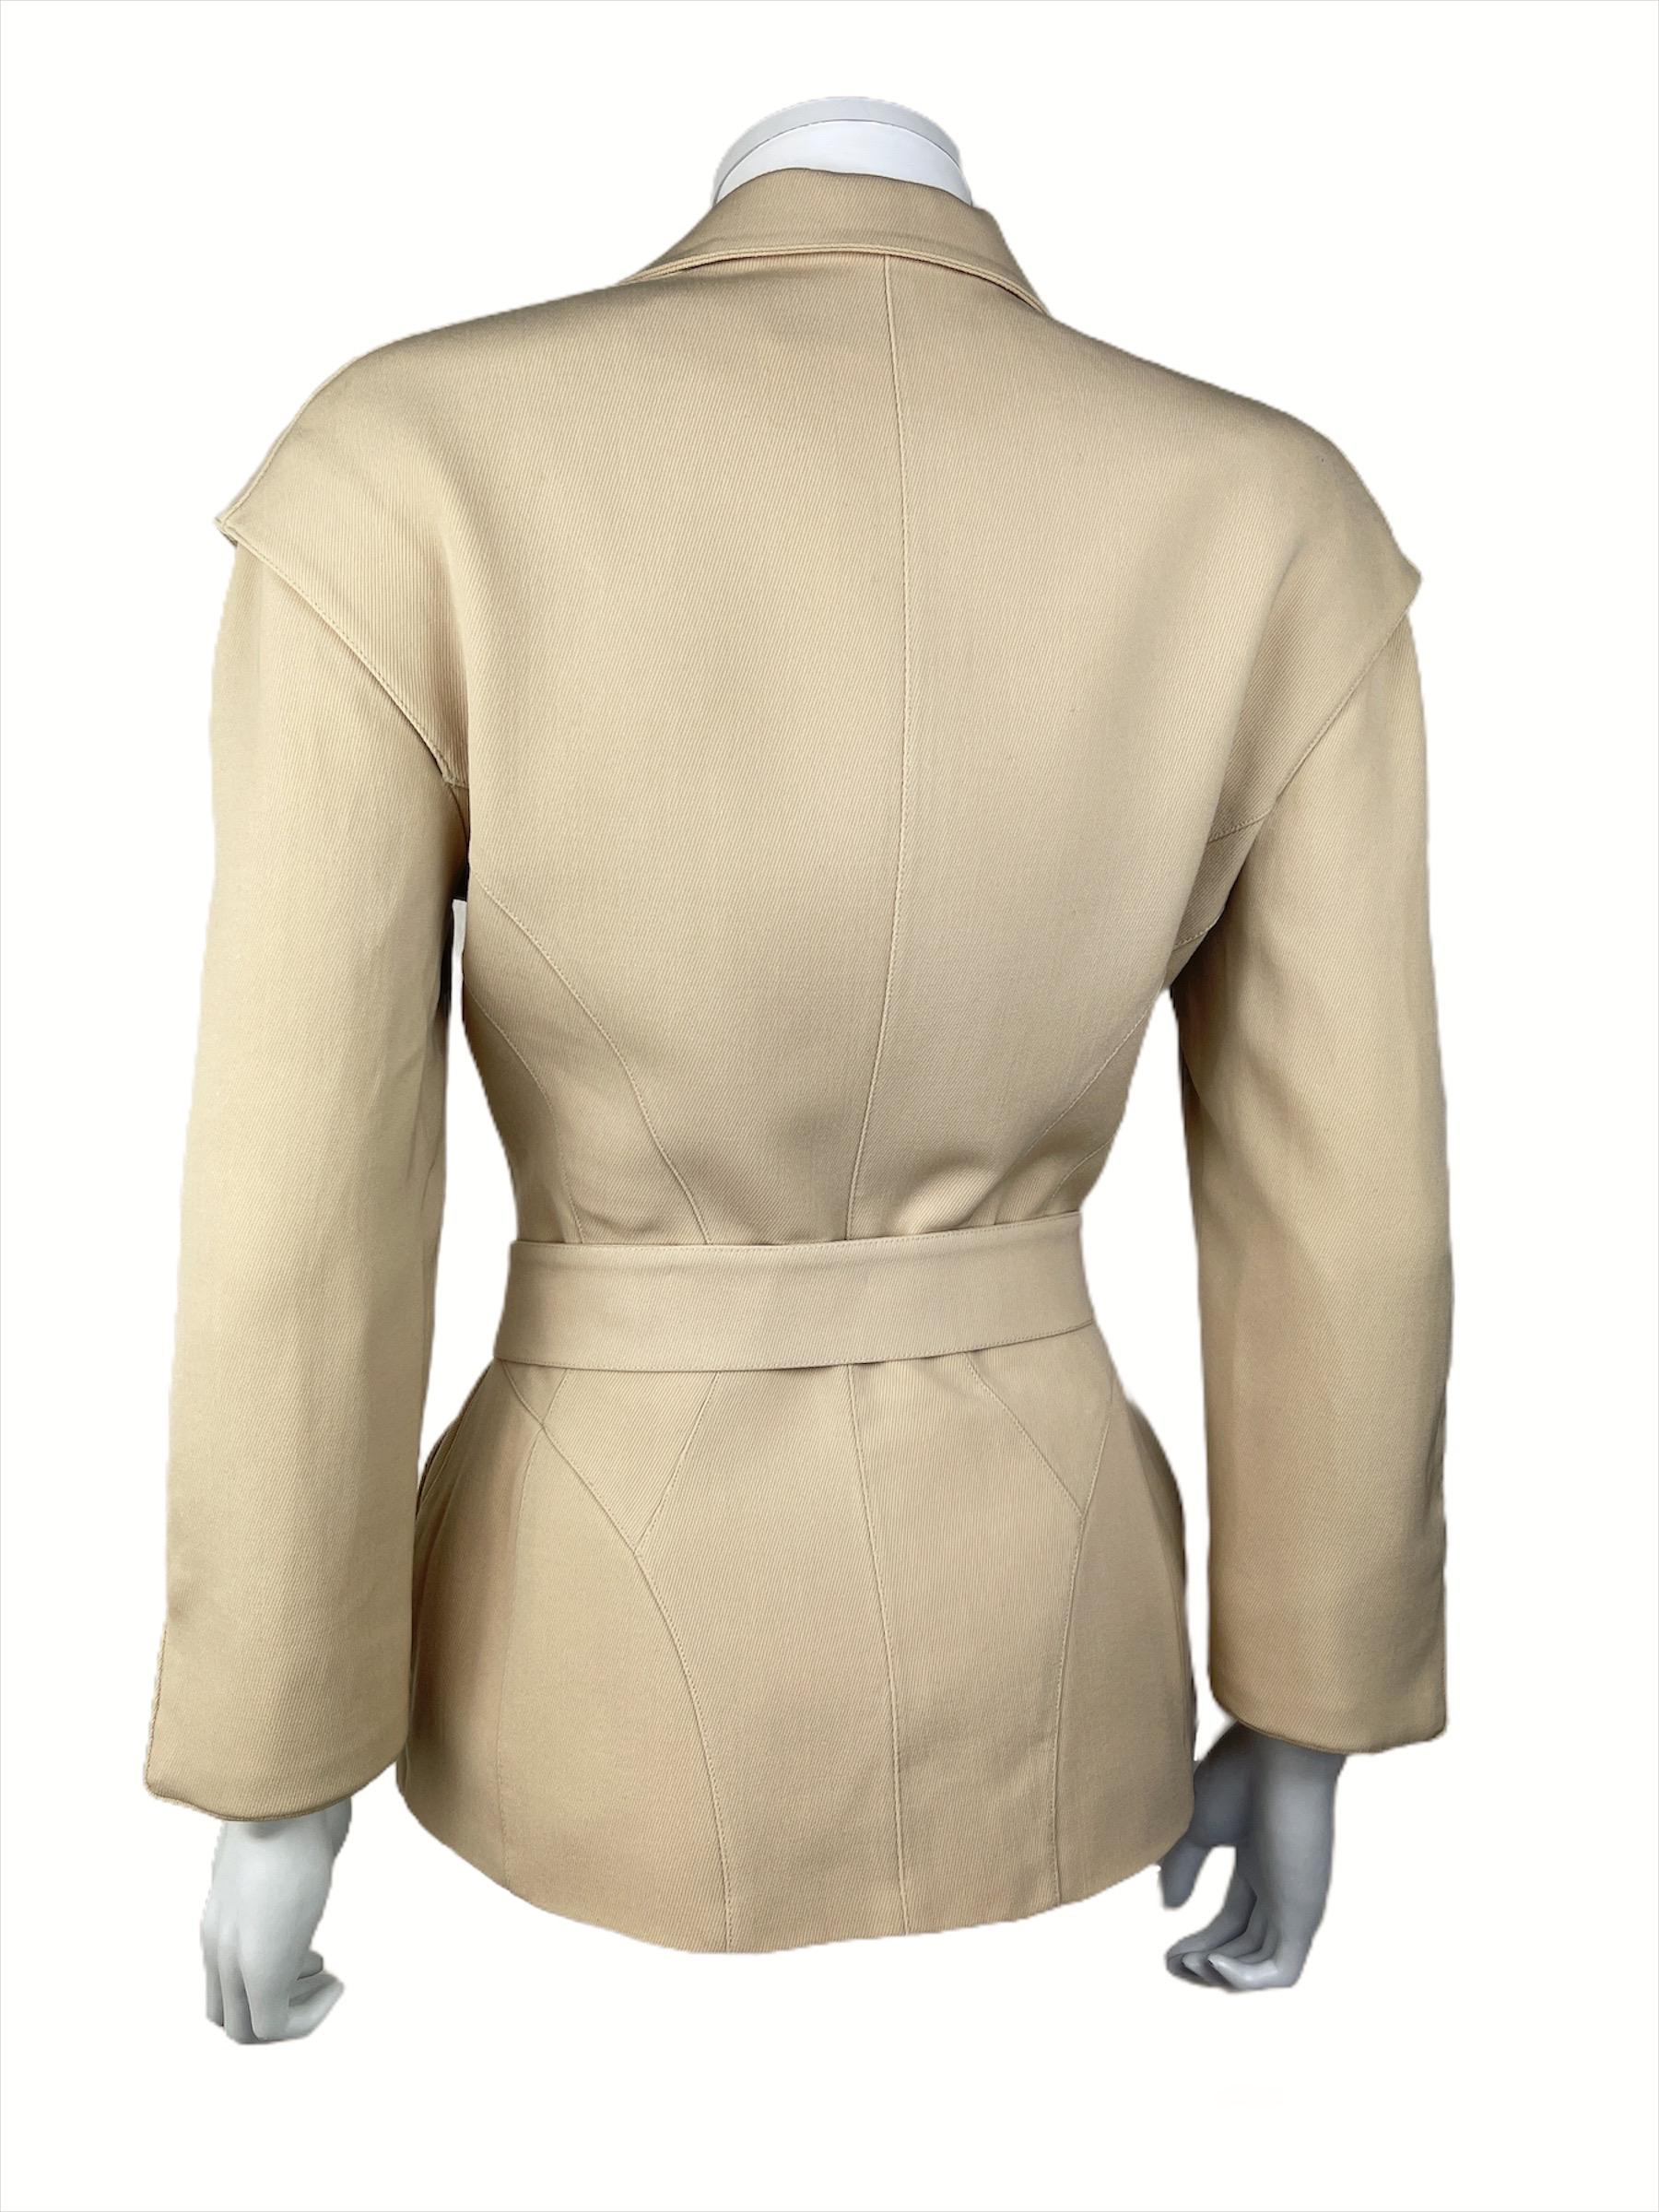 THIERRY MUGLER, Made in France circa 90’s.
Beautiful lined futuristic jacket made in a beige worsted wool. It has two pockets, a belt and a transversal zipper. It also has removable shoulder pads.
The belt has a graphic metallic signed hardware.